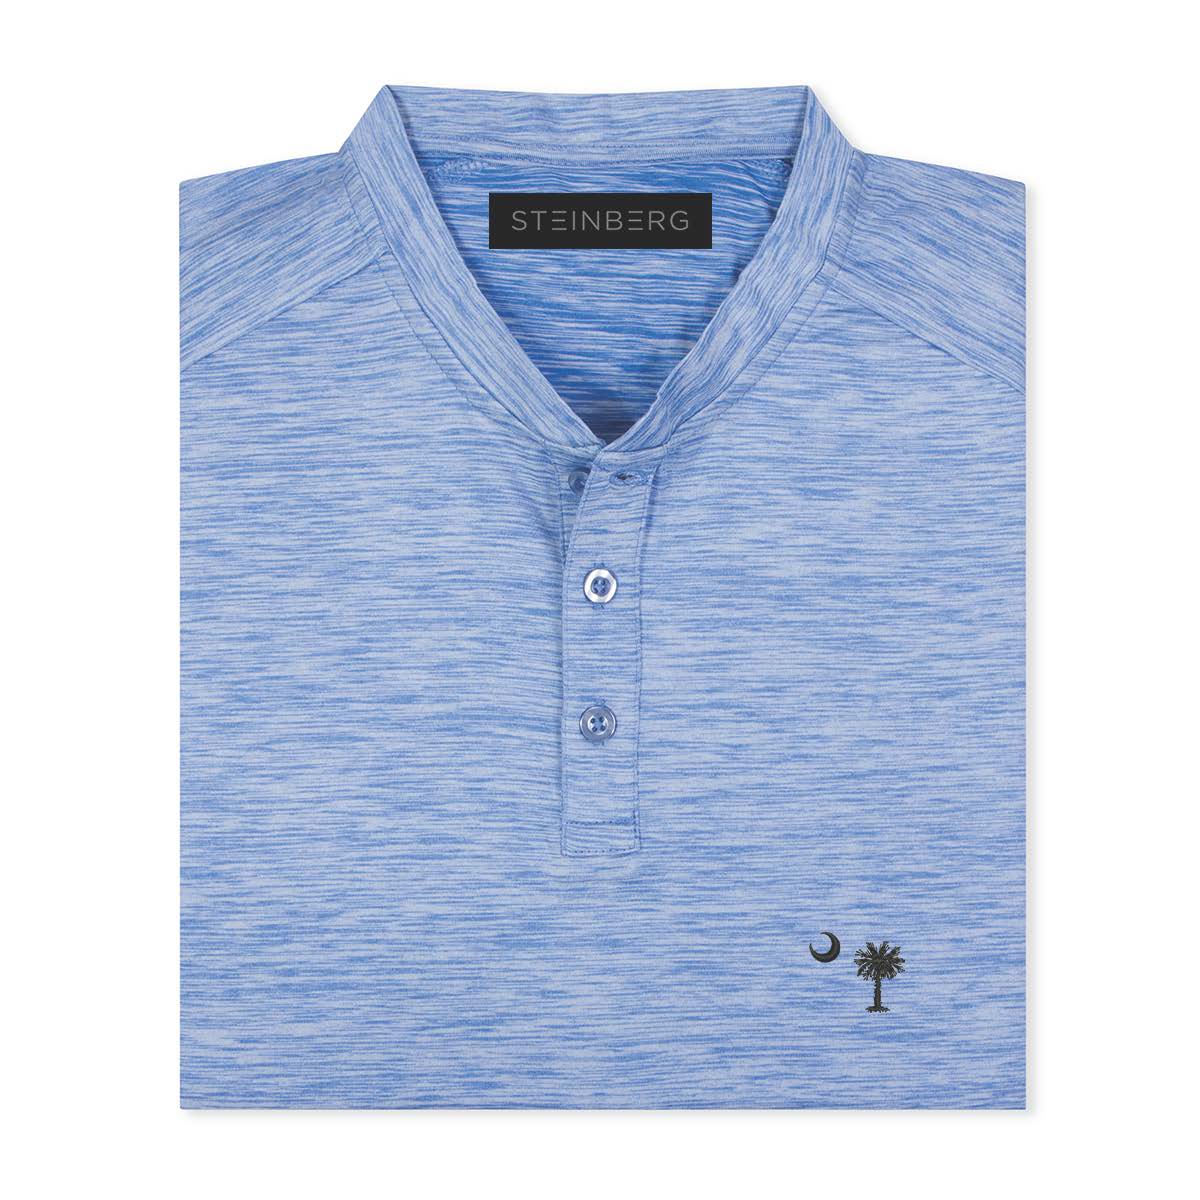 The First Tee Performance Polo the Palmetto Moon Collection